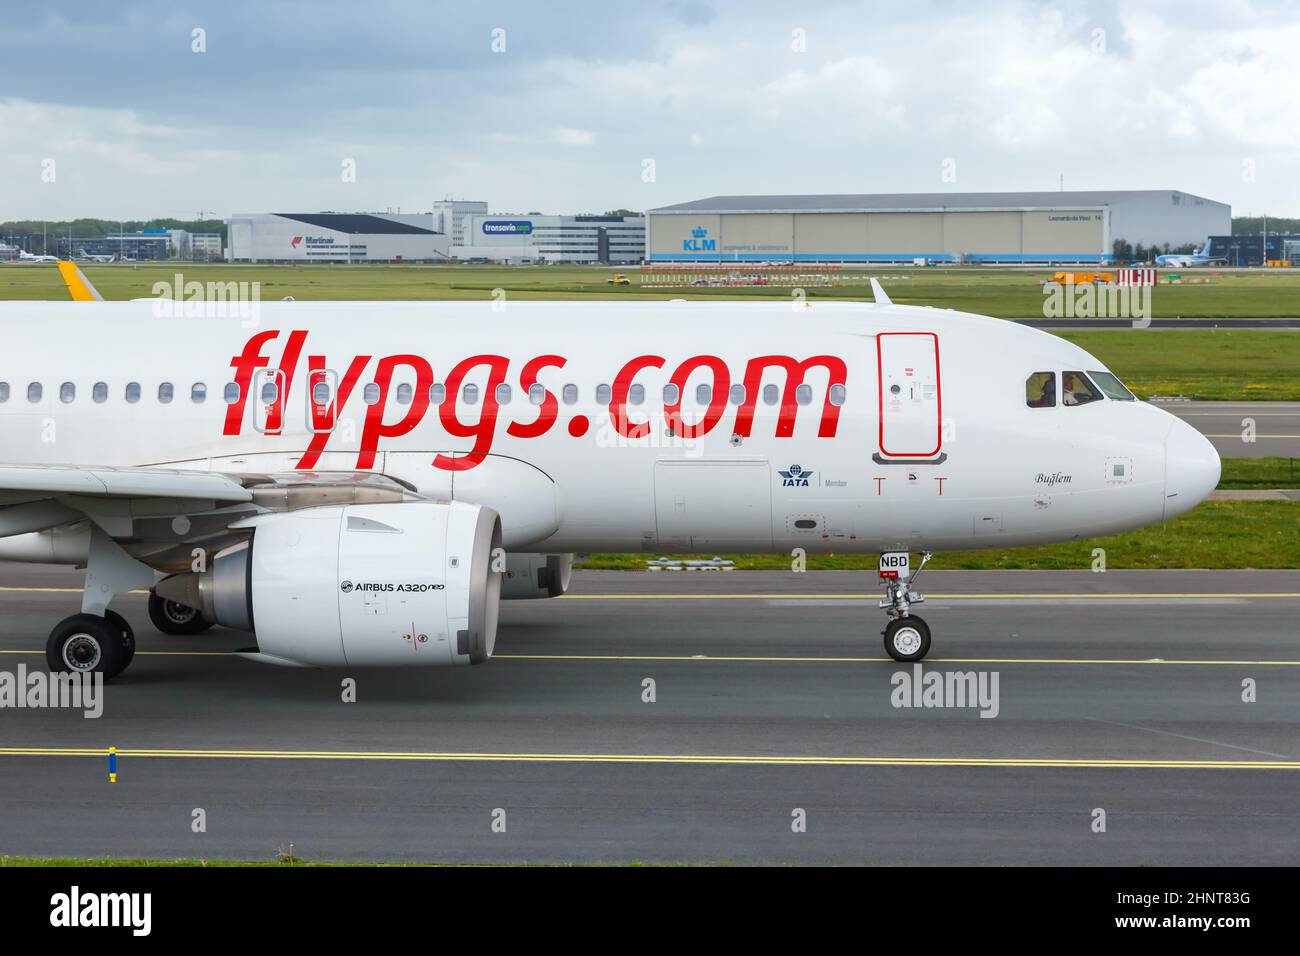 Pegasus Airlines Airbus A320neo airplane Amsterdam Schiphol airport in the Netherlands Stock Photo